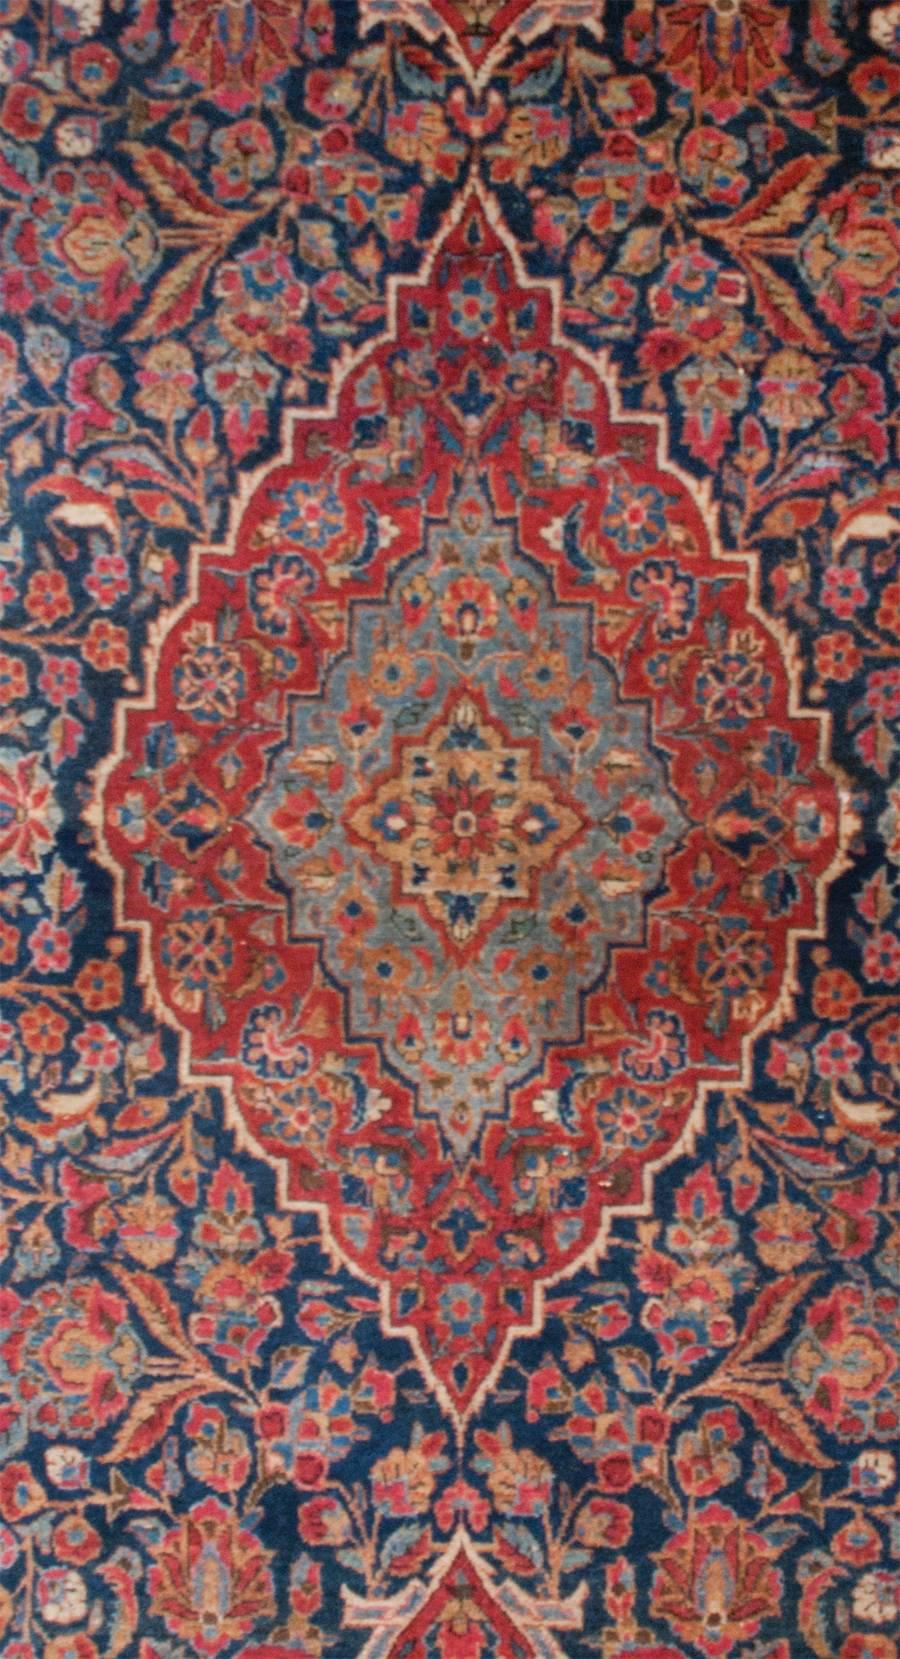 An outstanding early 20th century Persian Kashan rug with an extraordinary pattern of myriad intertwined blossoming branches woven in dark and light indigo, cranberry, crimson, and natural wools. The border is exceptional with a complementary